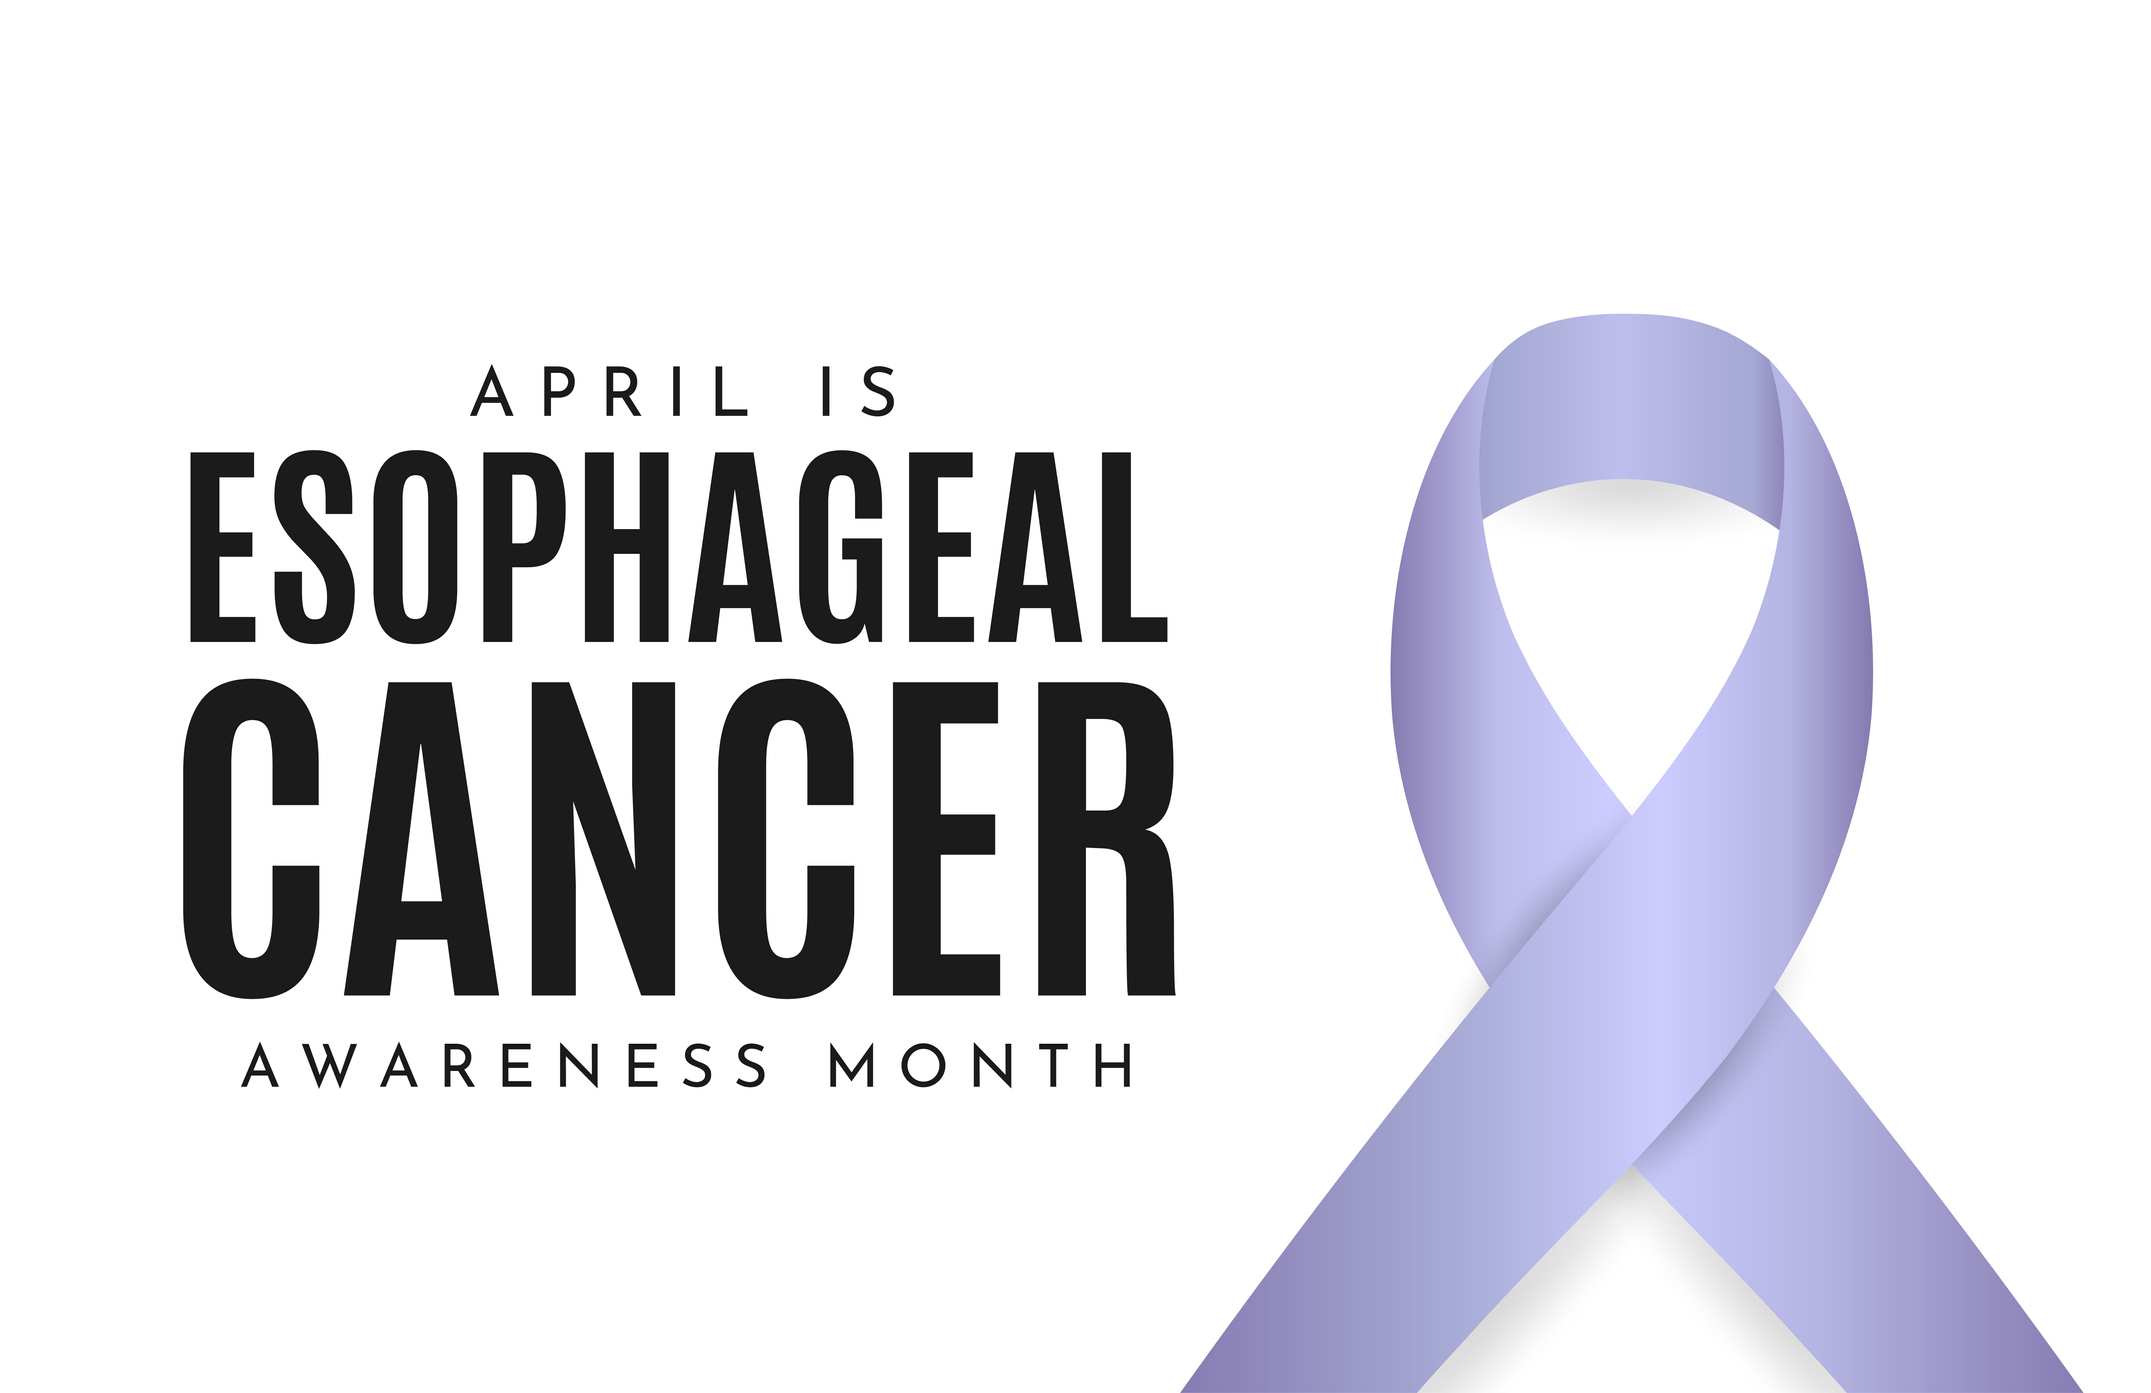 April is Esophageal Cancer Awareness Month.